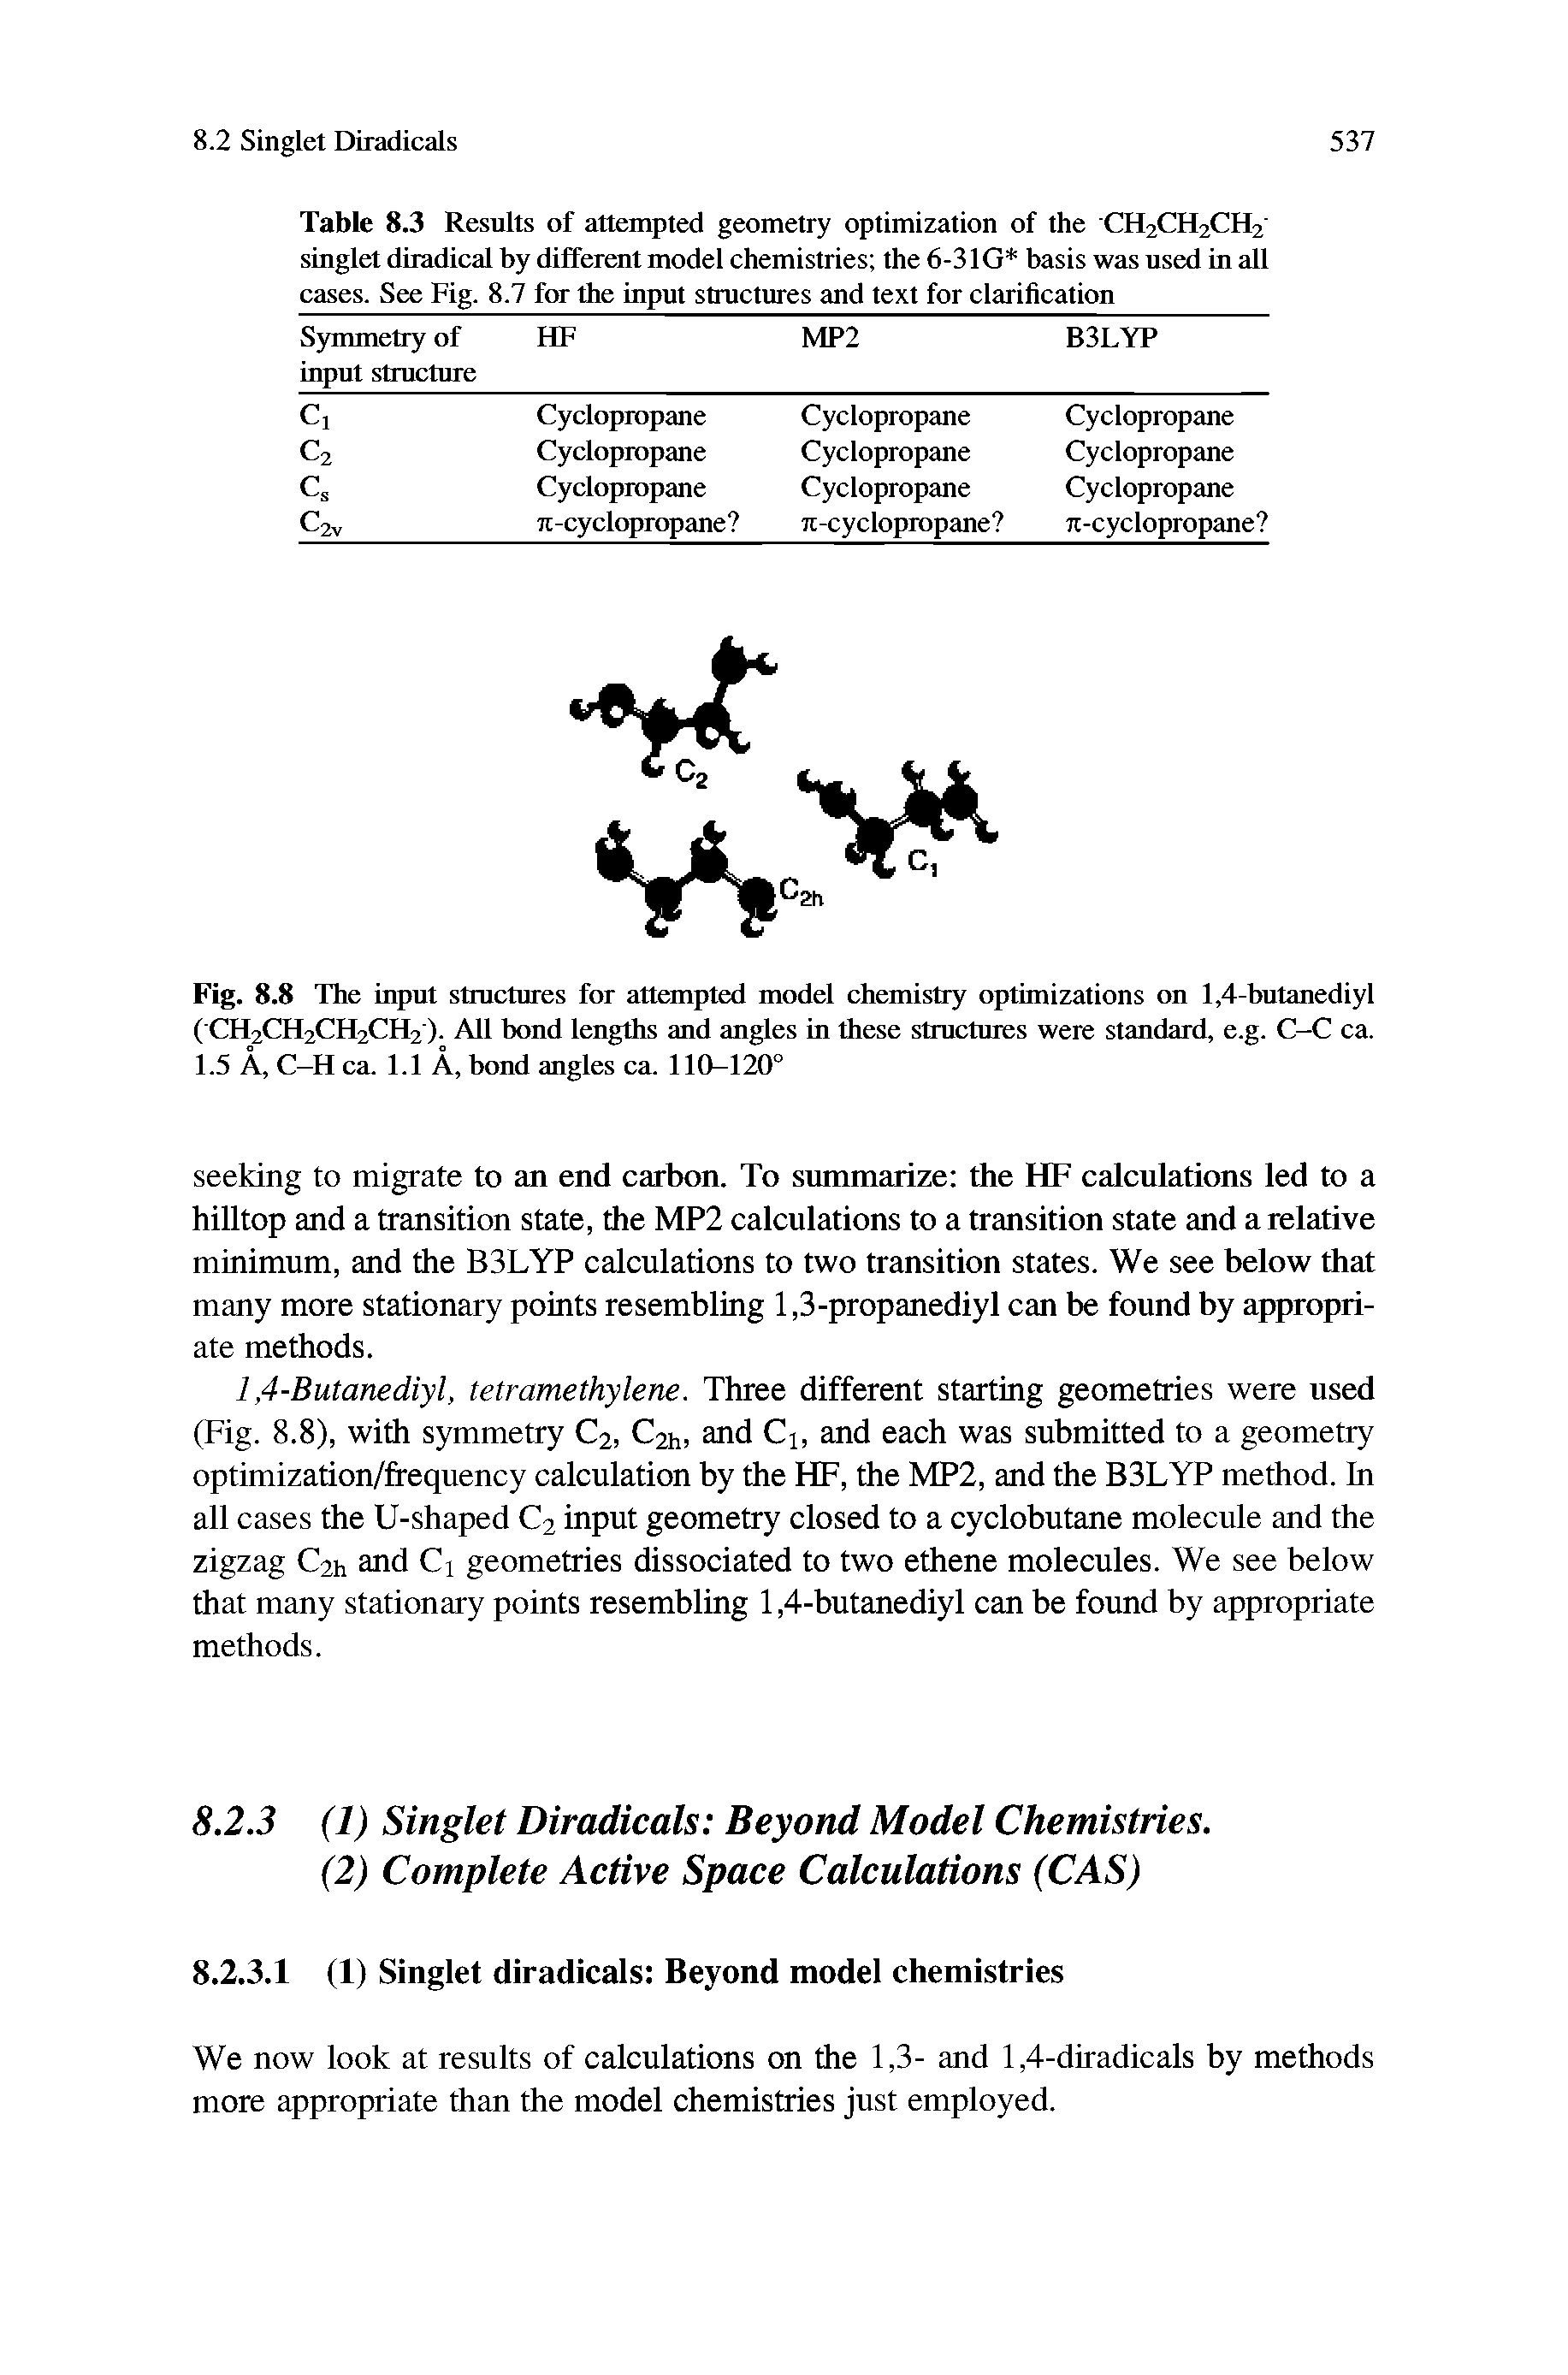 Fig. 8.8 The input structures for attempted model chemistry optimizations on 1,4-butanediyl ( CH2CH2CH2CH2 ). All bond lengths and angles in these structures were standard, e.g. C-C ca. 1.5 A, C-H ca. 1.1 A, bond angles ca. 110-120°...